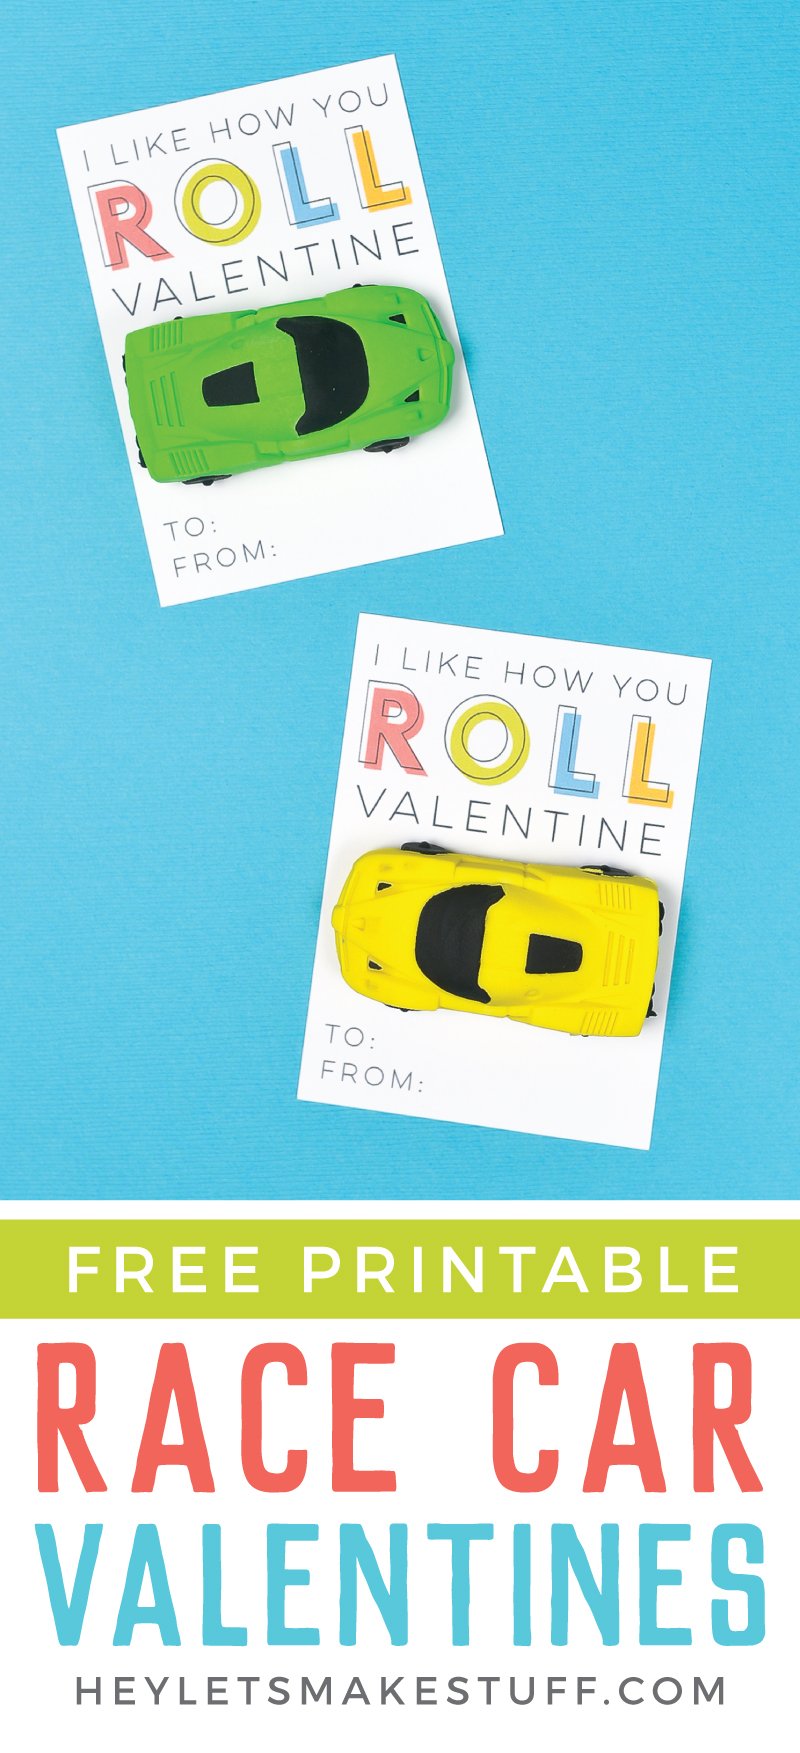 Two Valentine cards, one with a yellow toy car attached to it and the other one with a green toy car and both say, \"I Like How You Roll Valentine\" and an advertisement for free printable race car valentines from HEYLETSMAKESTUFF.COM